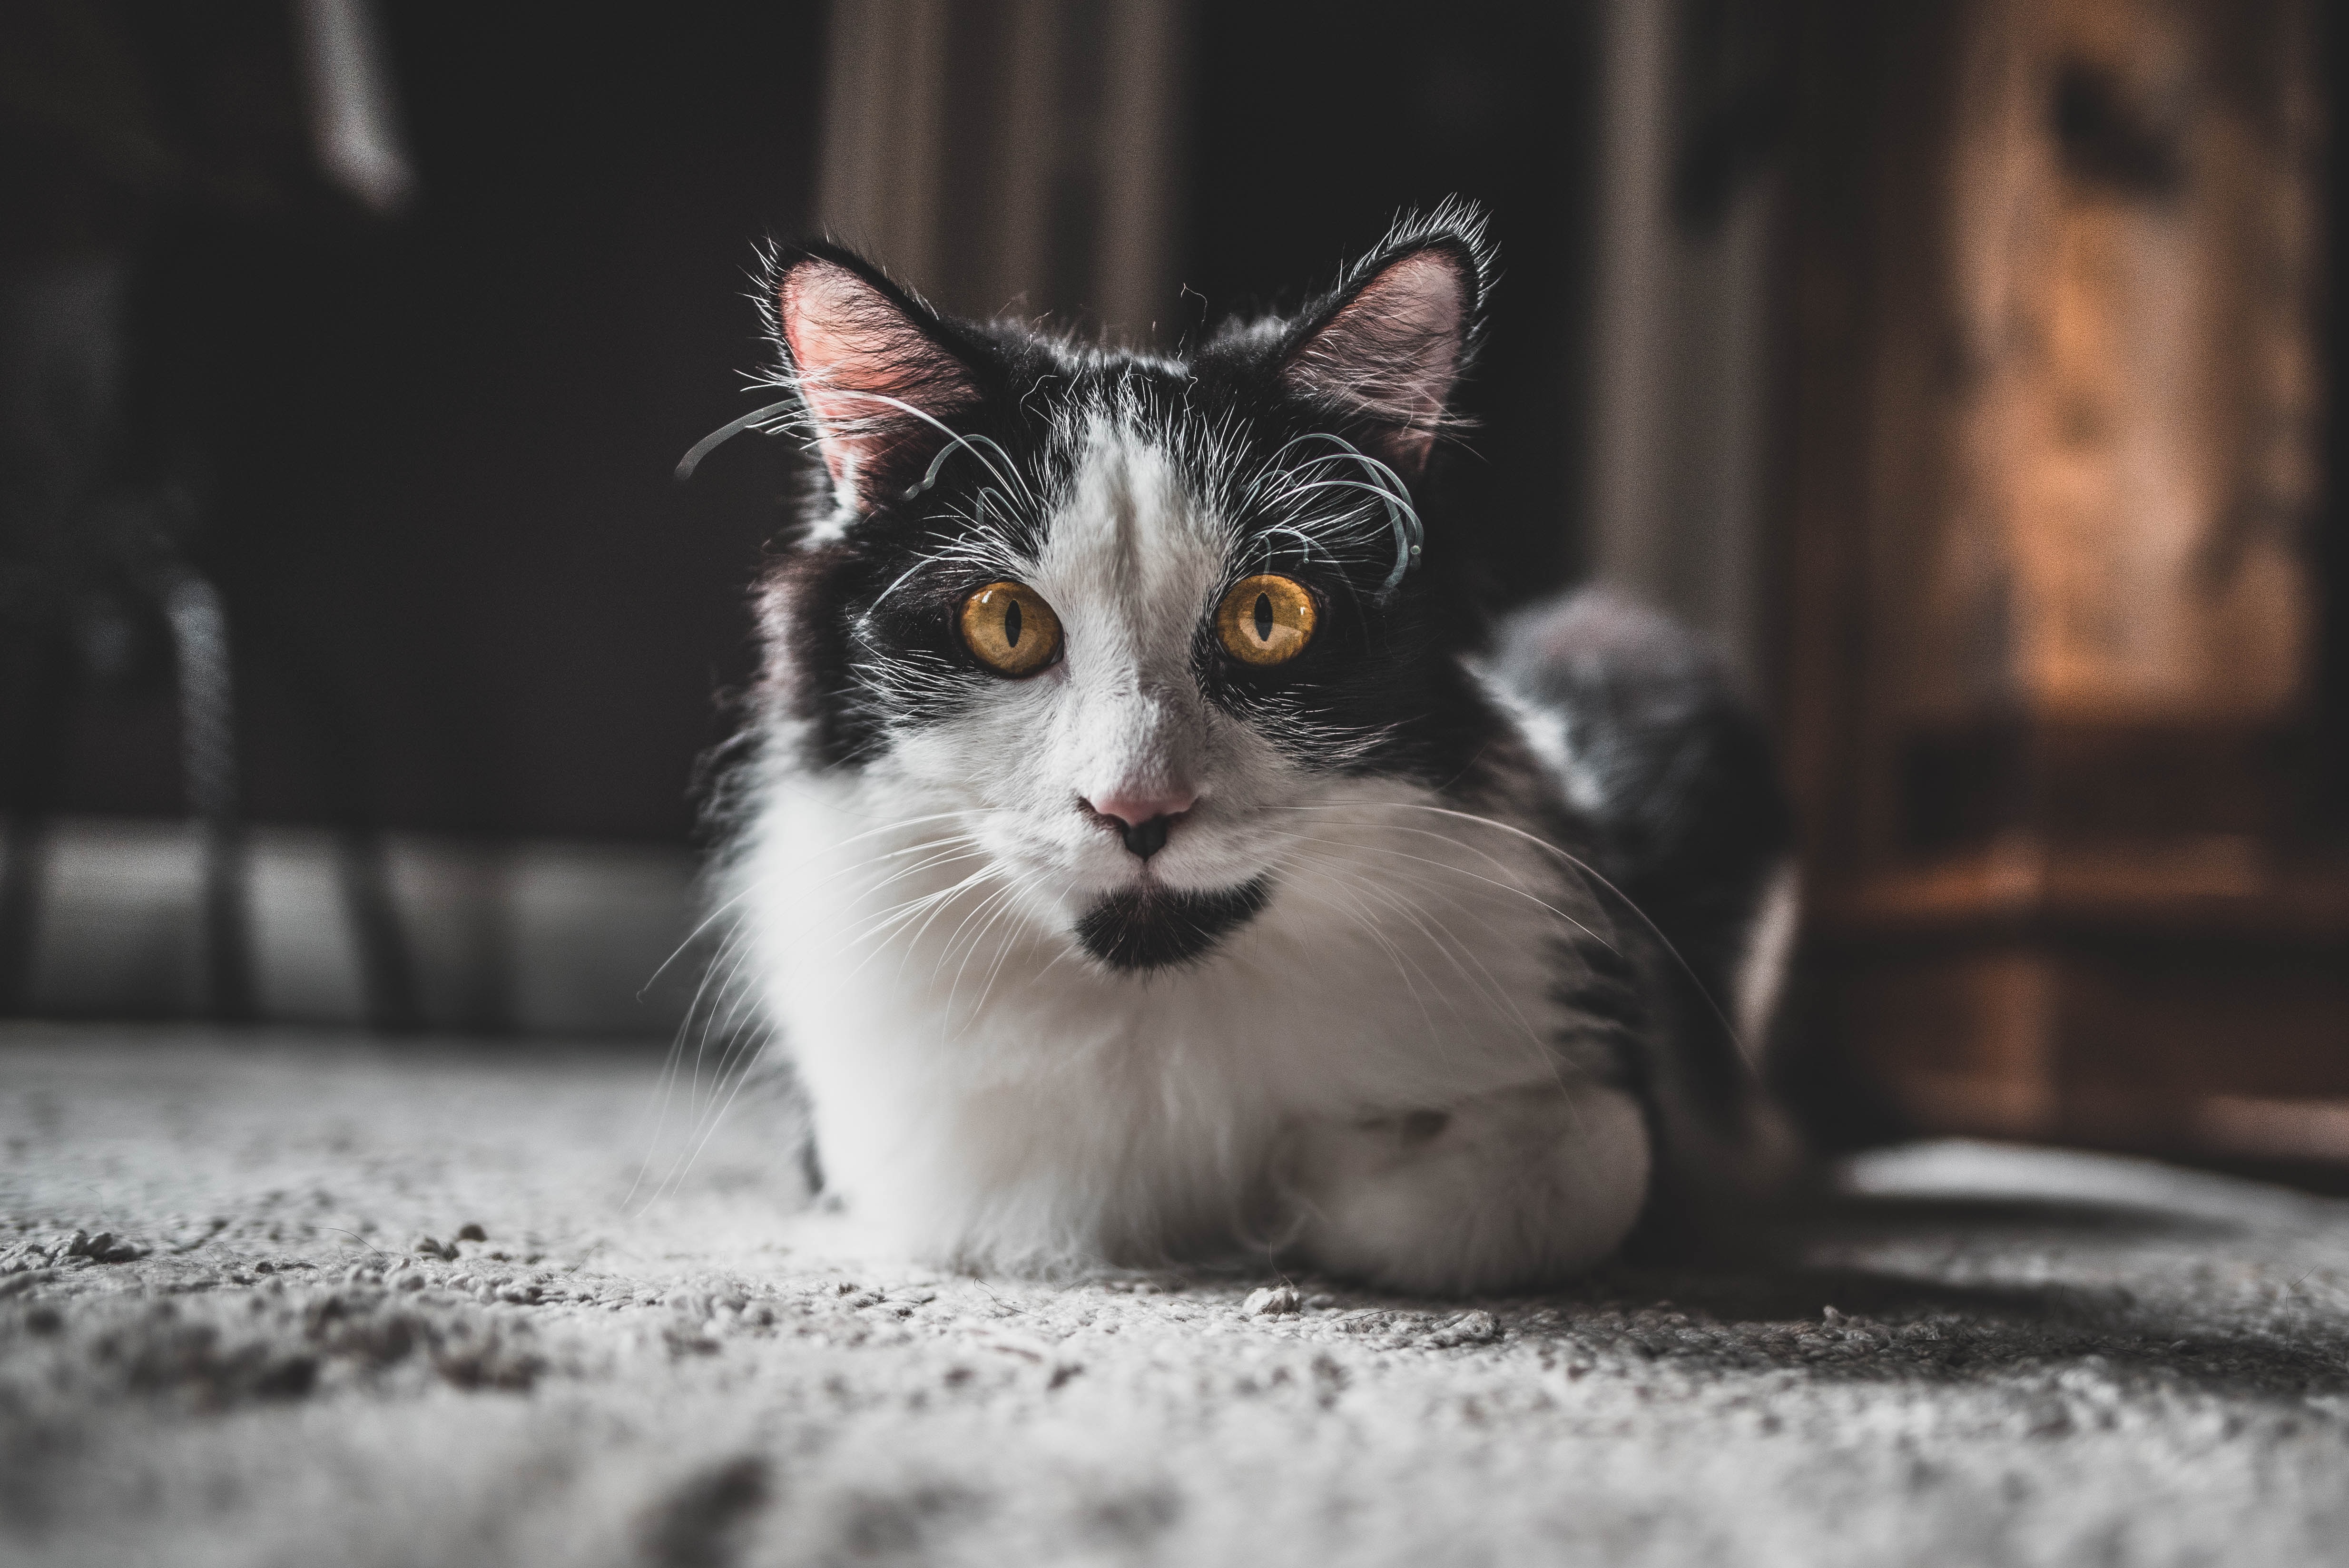 android pet, animals, cat, fluffy, sight, opinion, animal